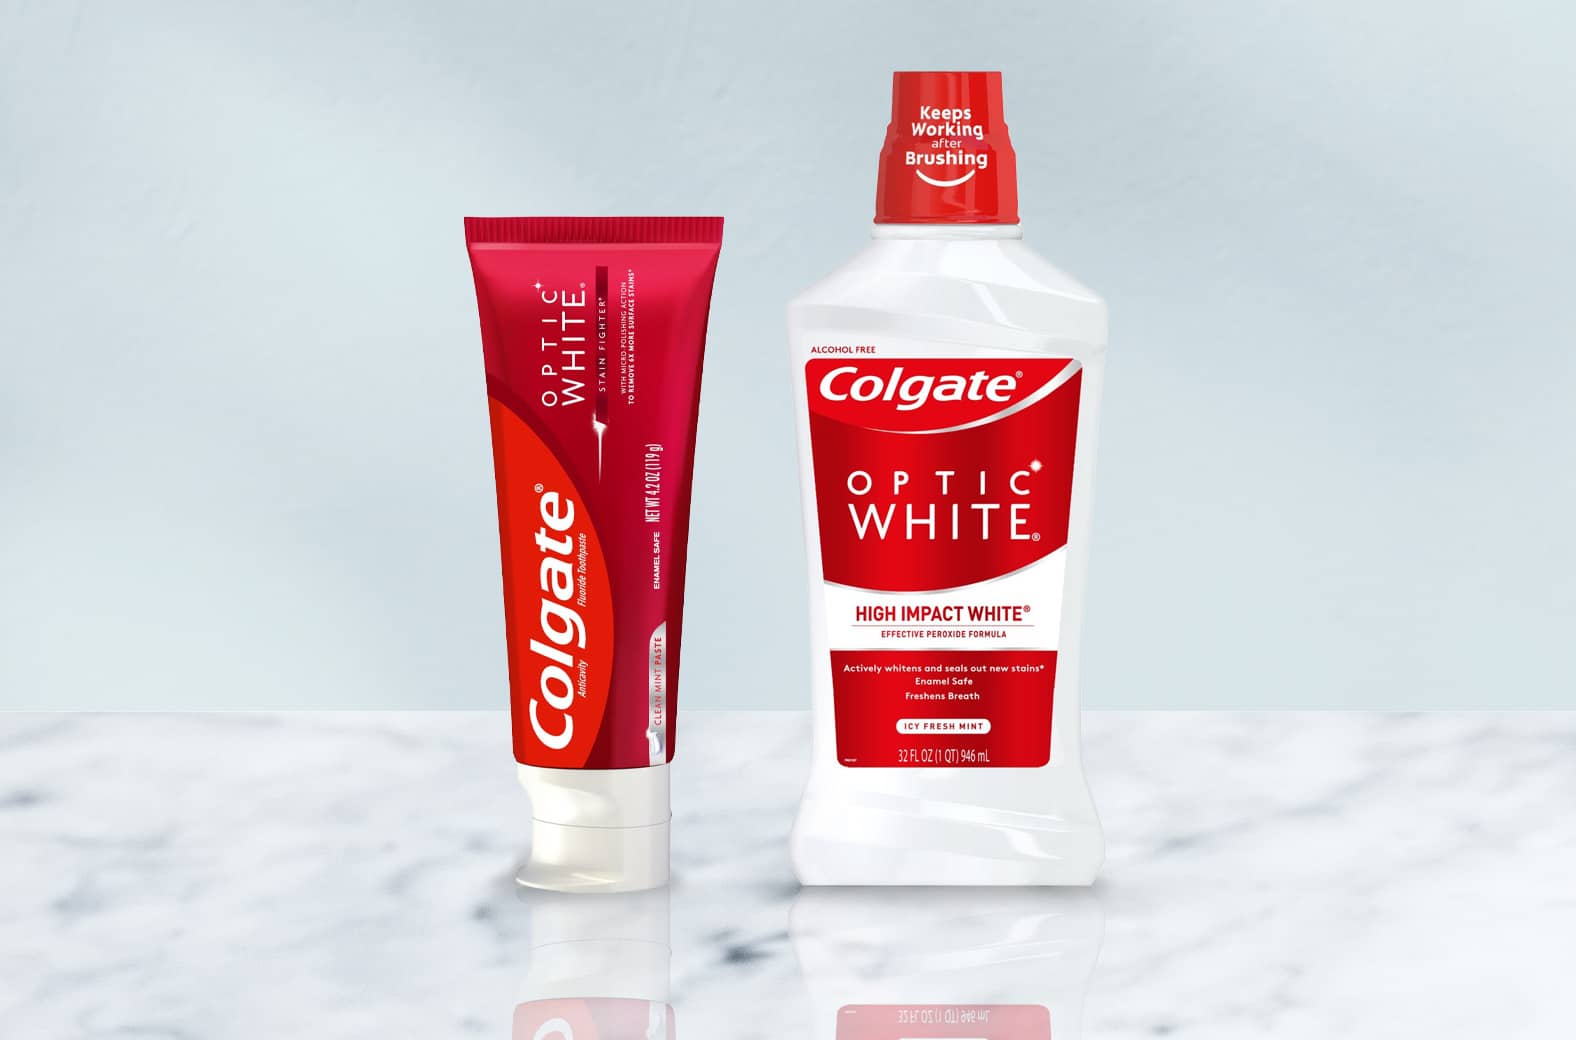 Colgate Optic White oral care products